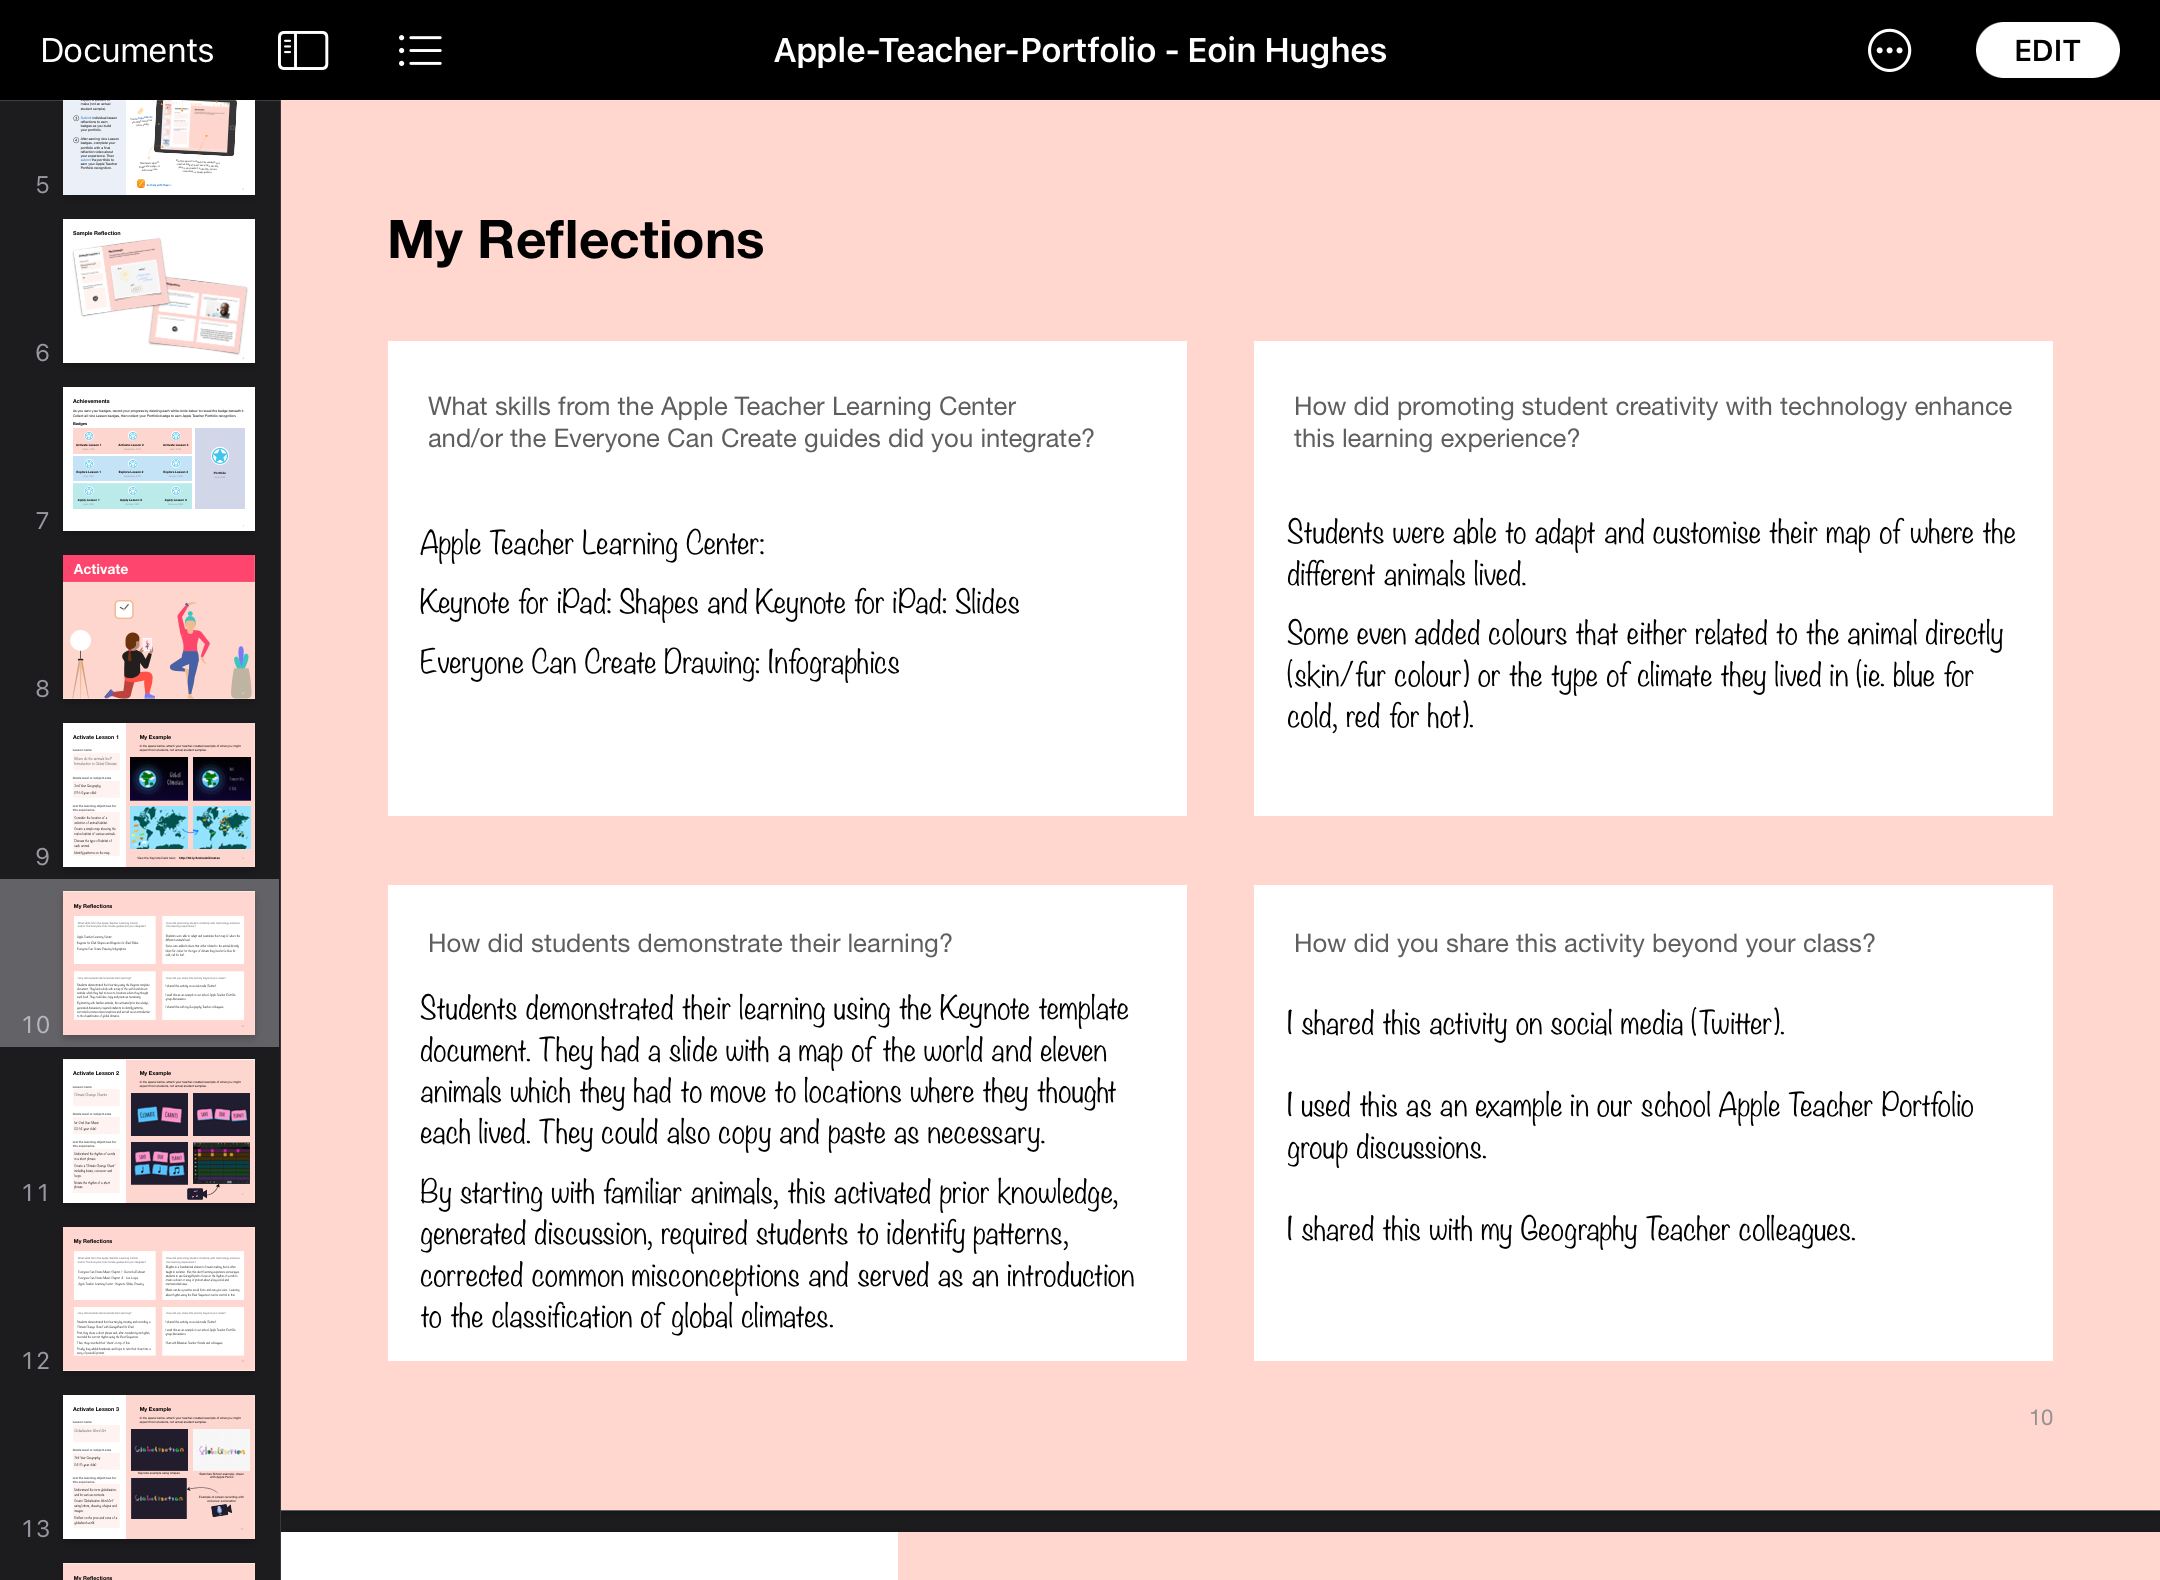 Apple Teacher Portfolio Activate lesson 1 screenshot. Includes reflections on skills, and how it promoted student creativity.